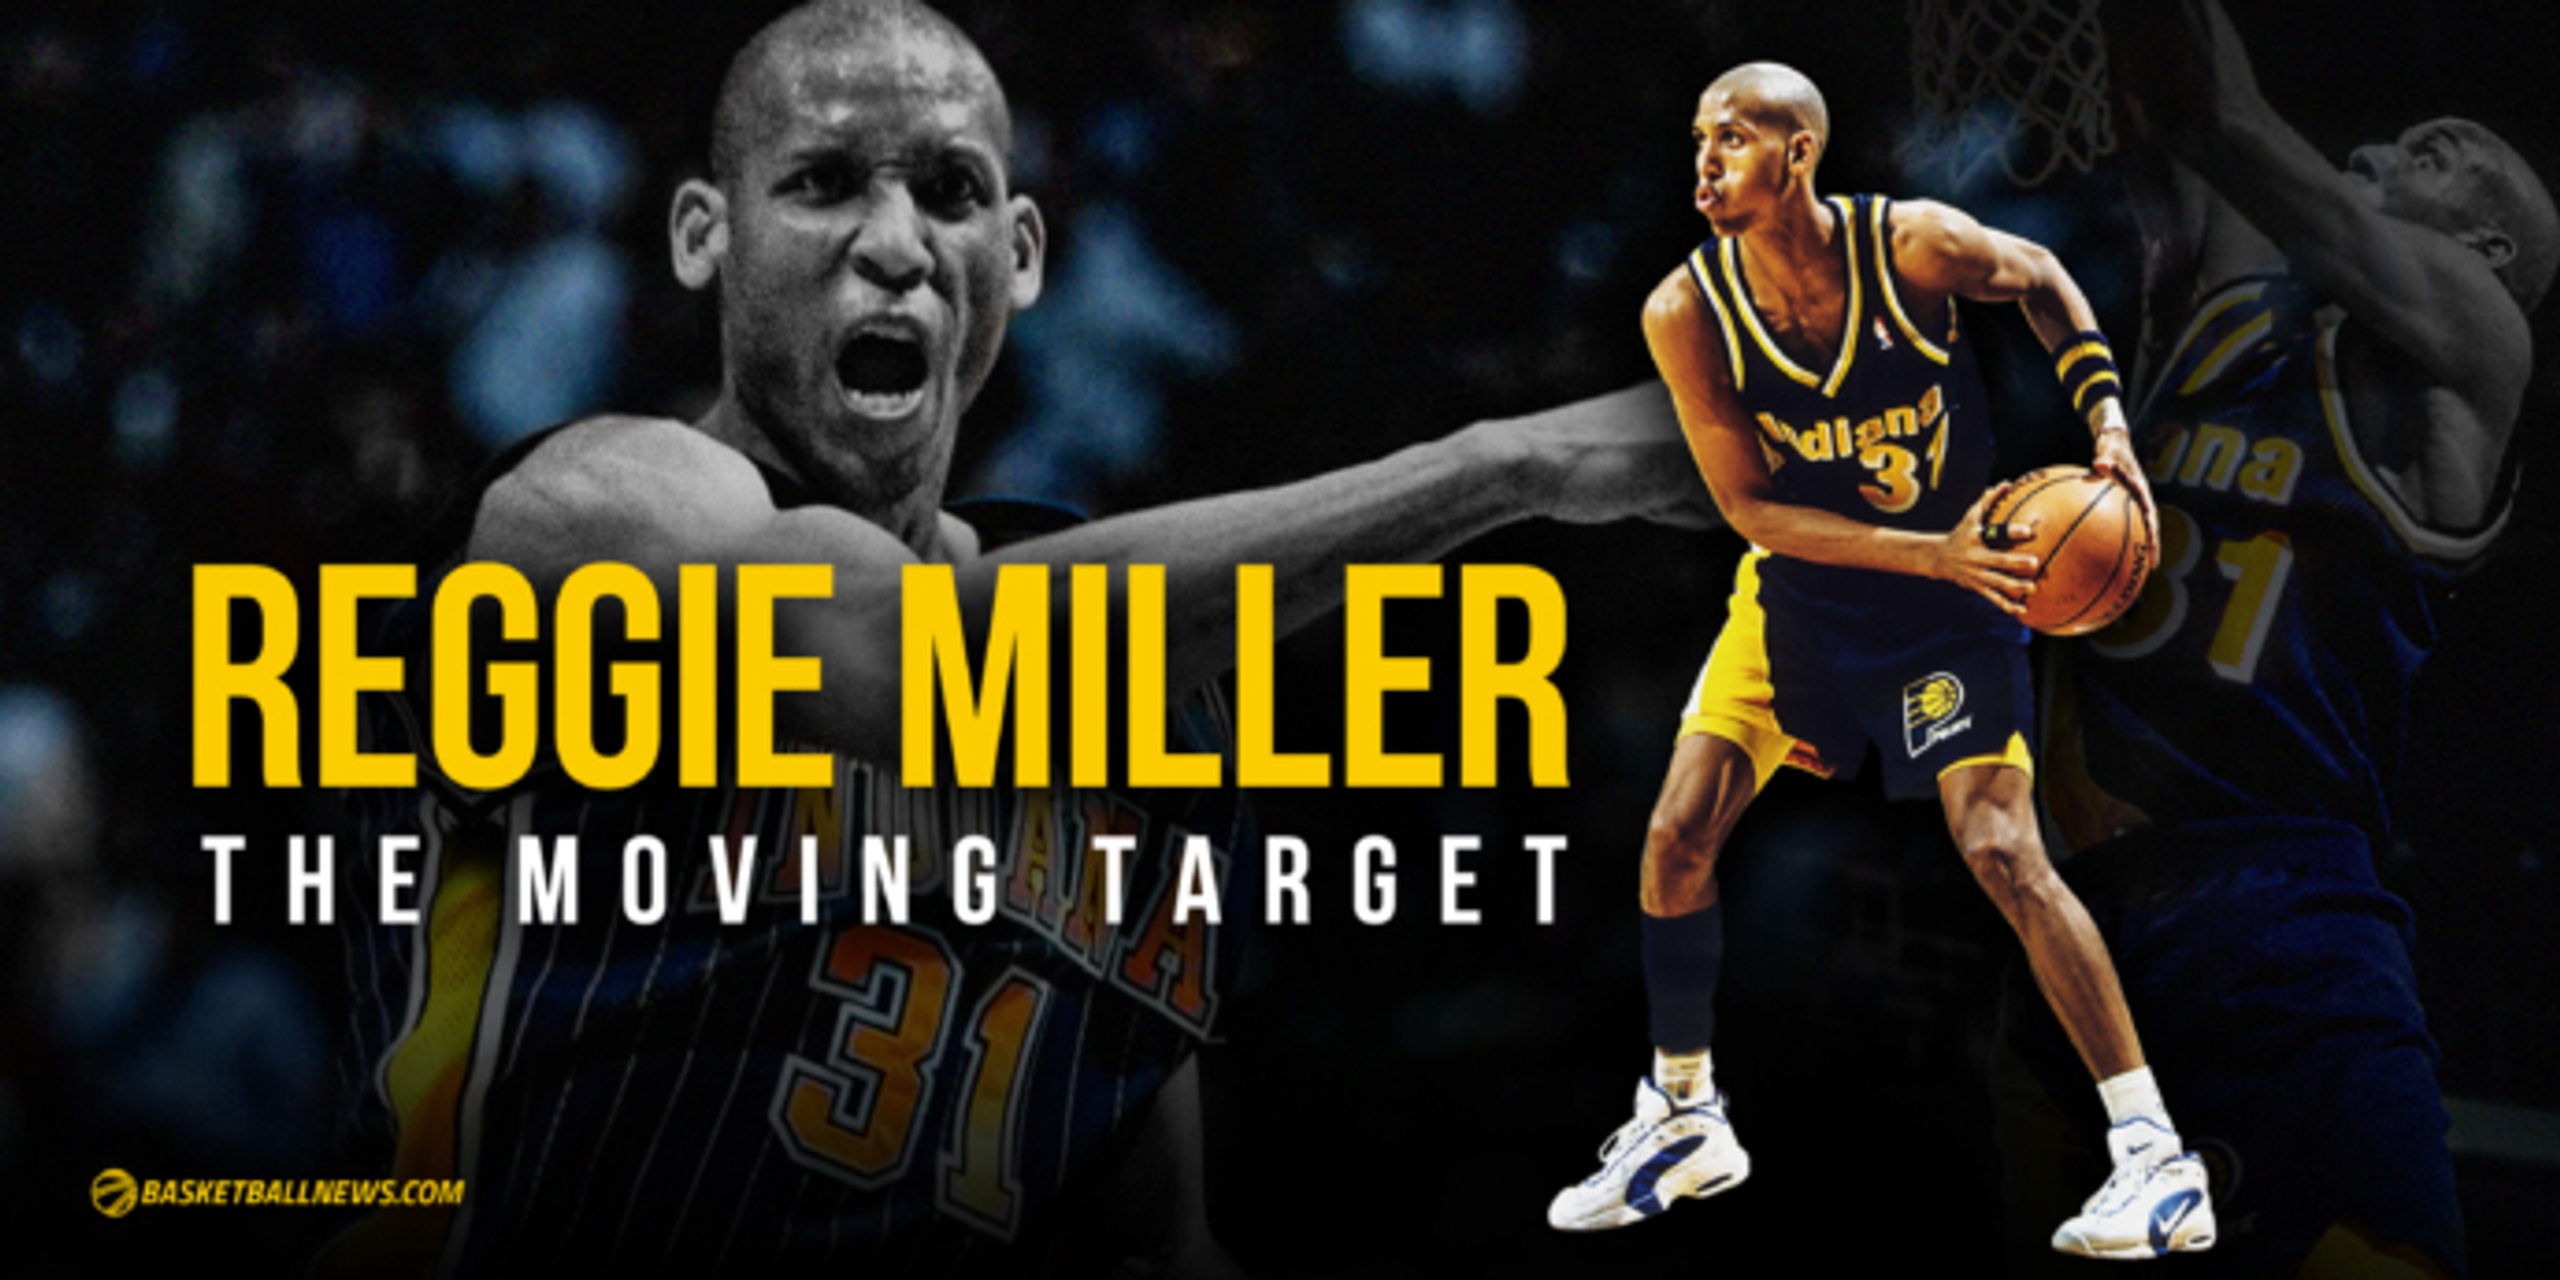 Blazing the Trail: Reggie Miller, the moving target